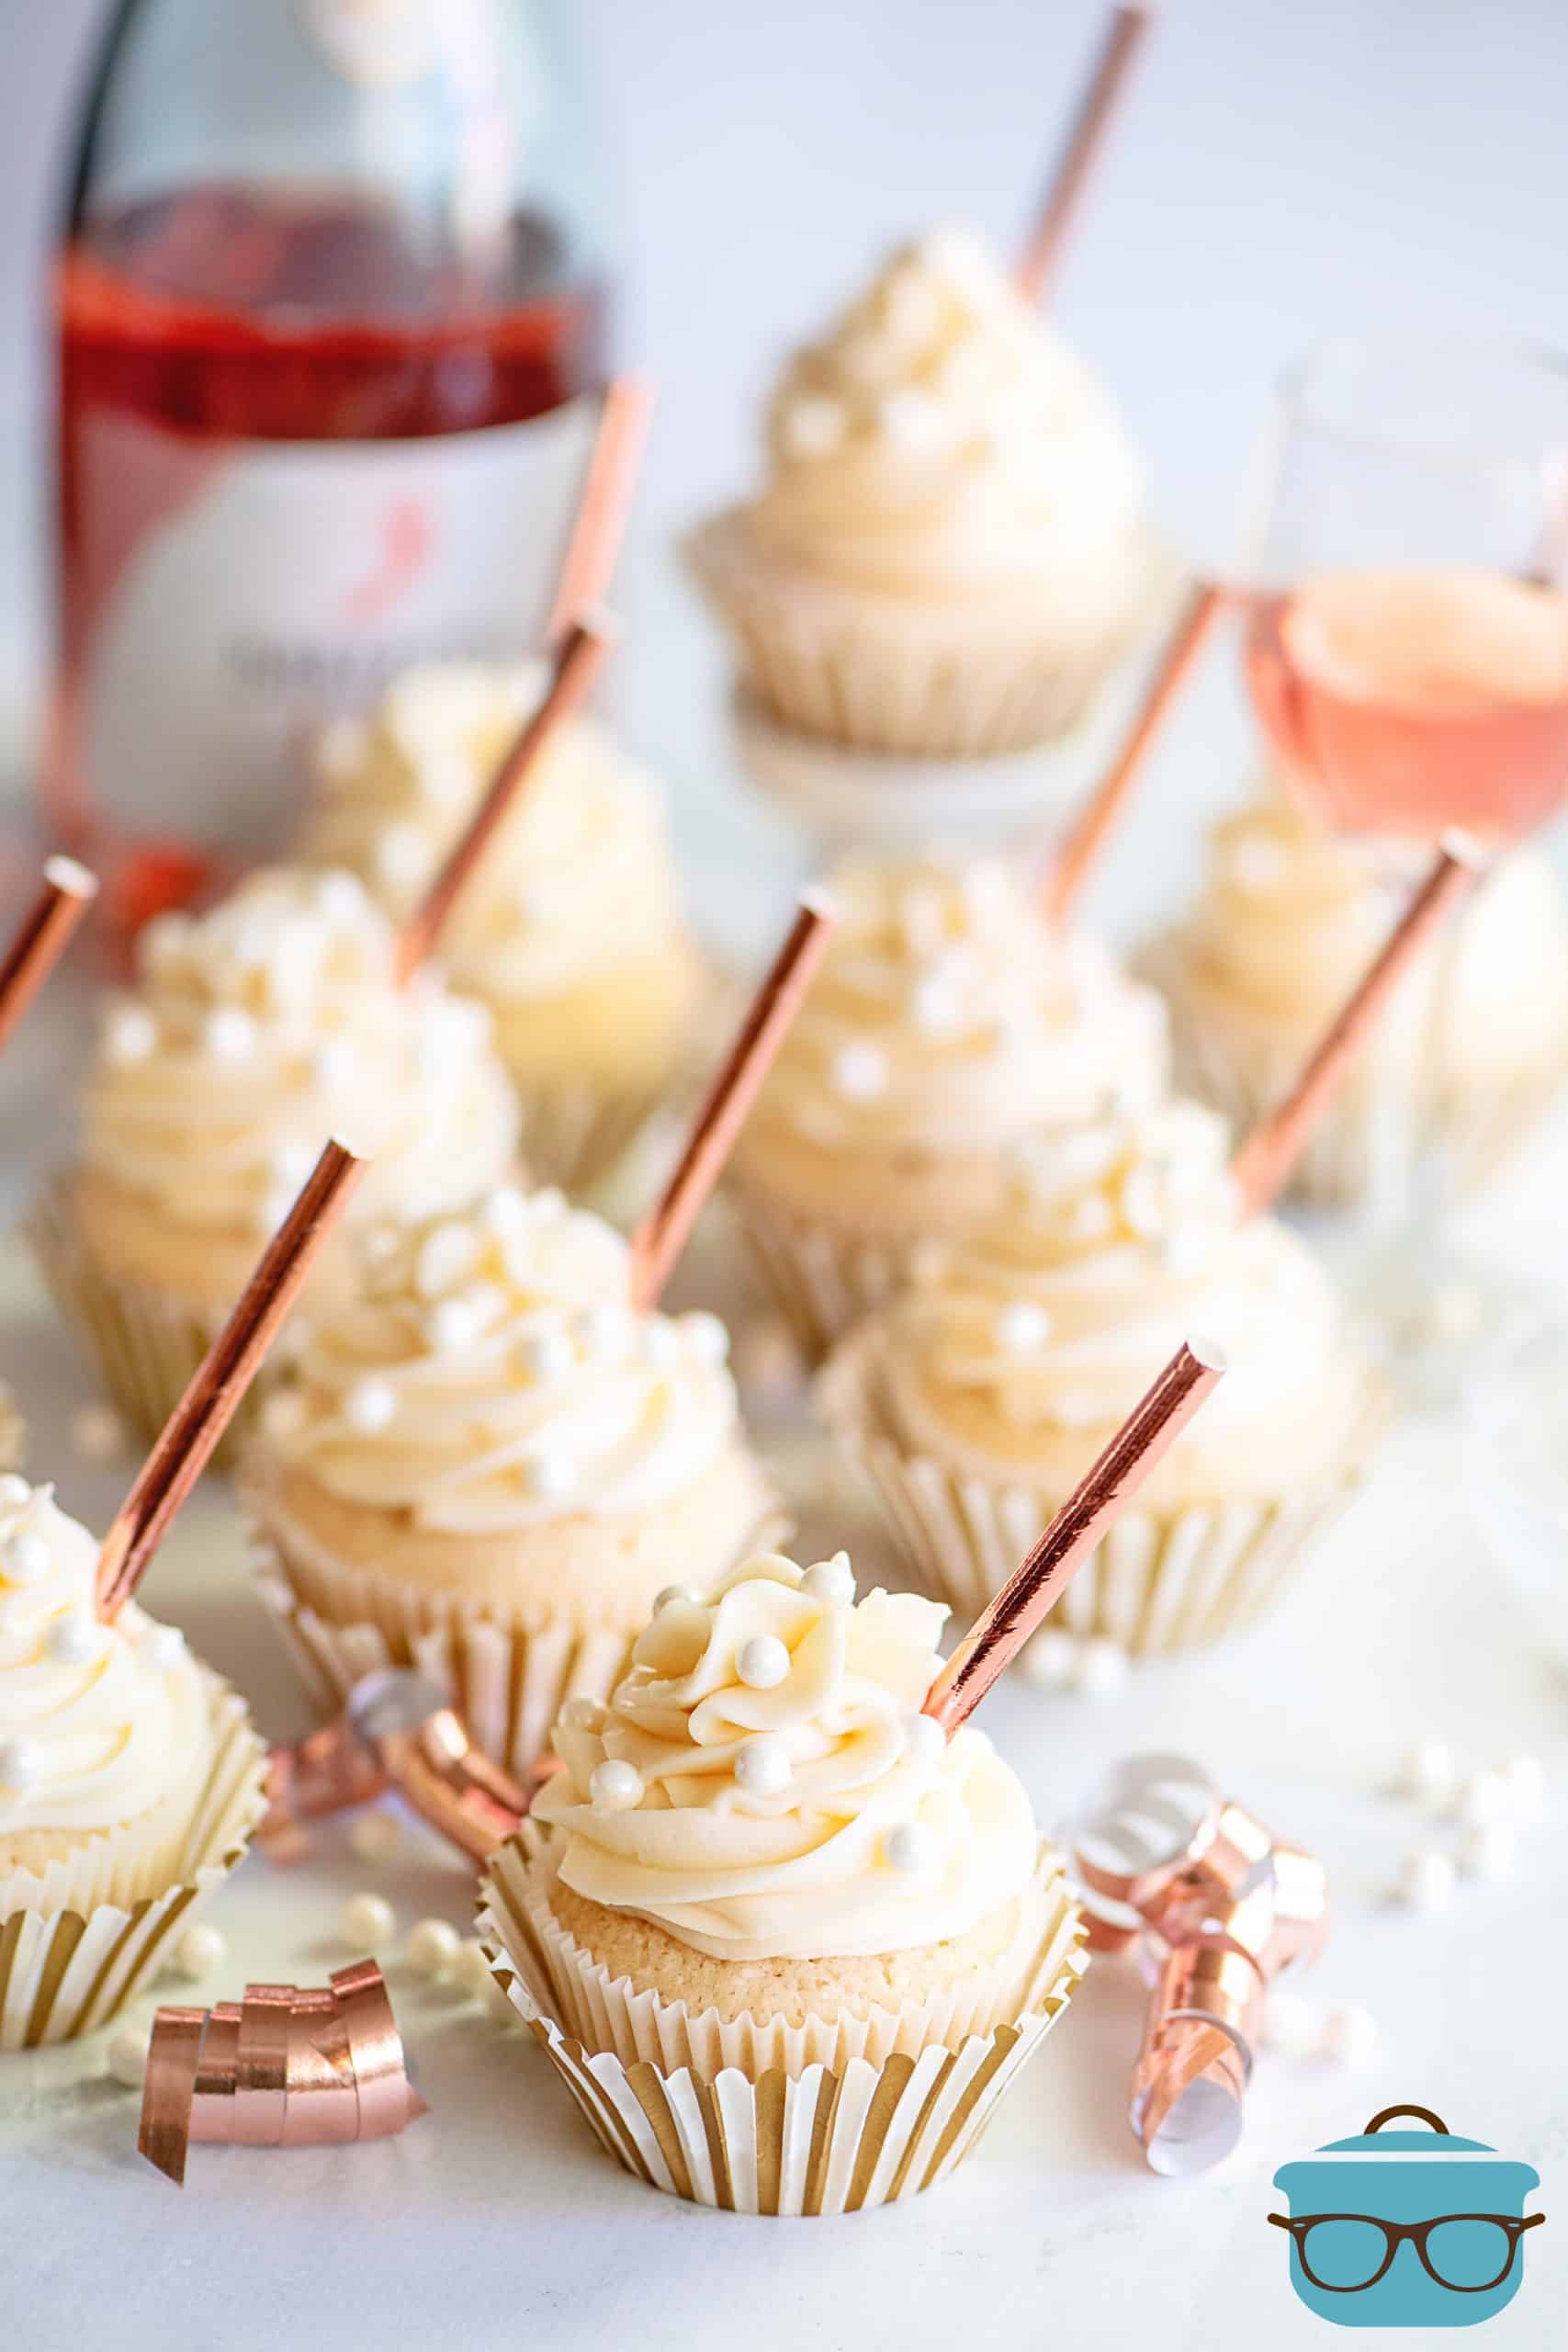 Decorated champagne cupcakes on a granite countertop with a bottle of pink champagne in the background.